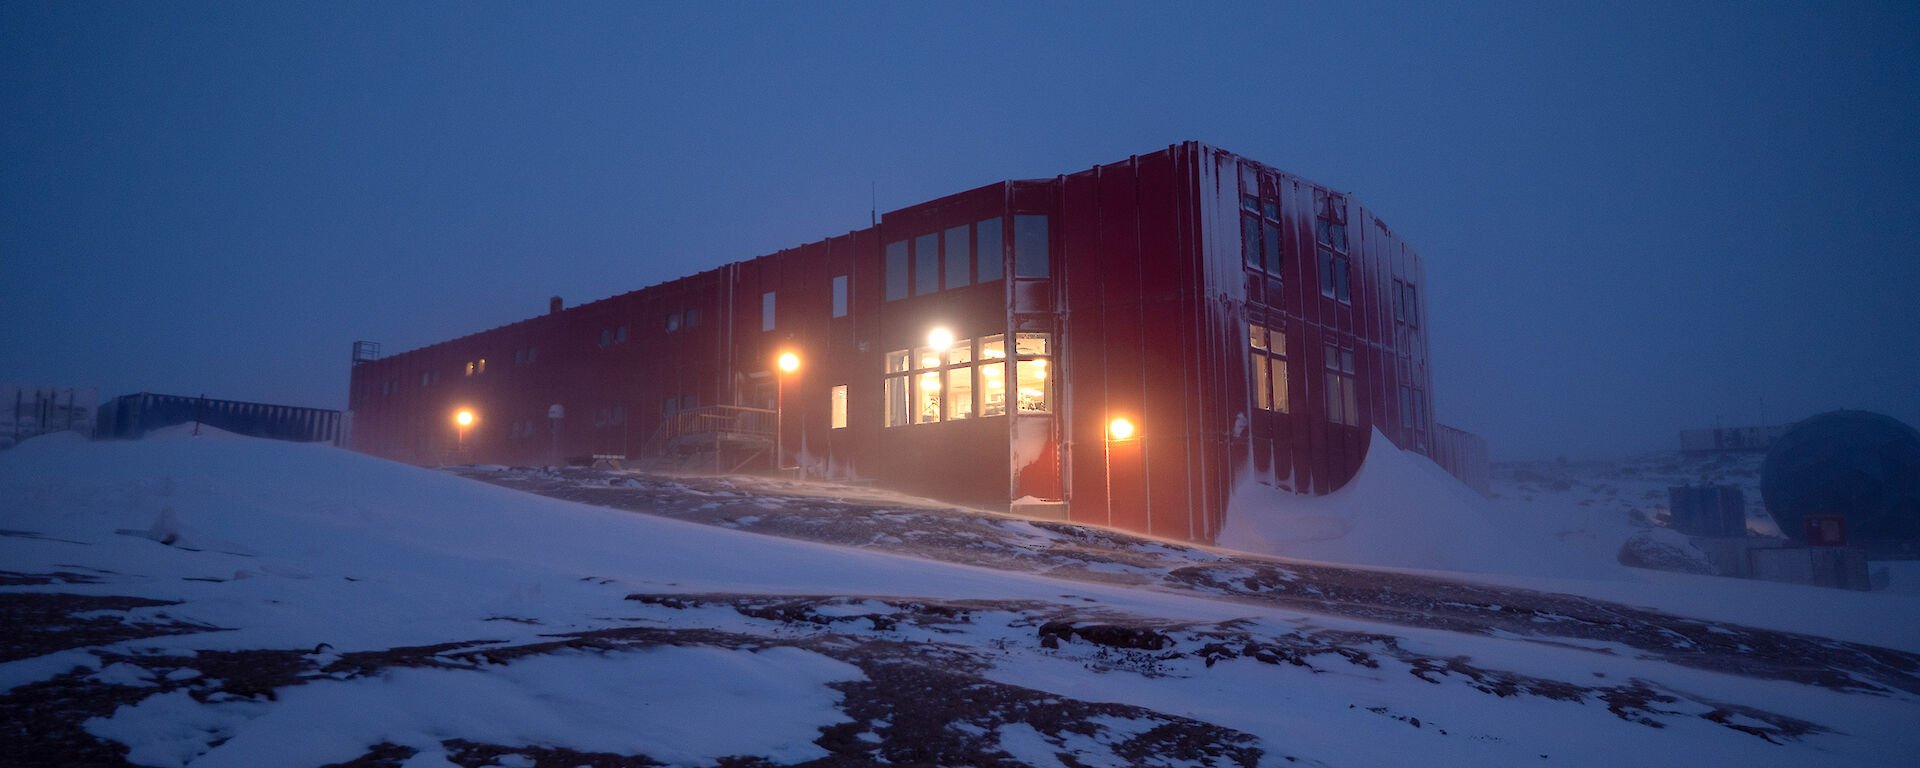 A large red building with lights on stands on a rocky landscape. Snow drifts lie against the building's side.